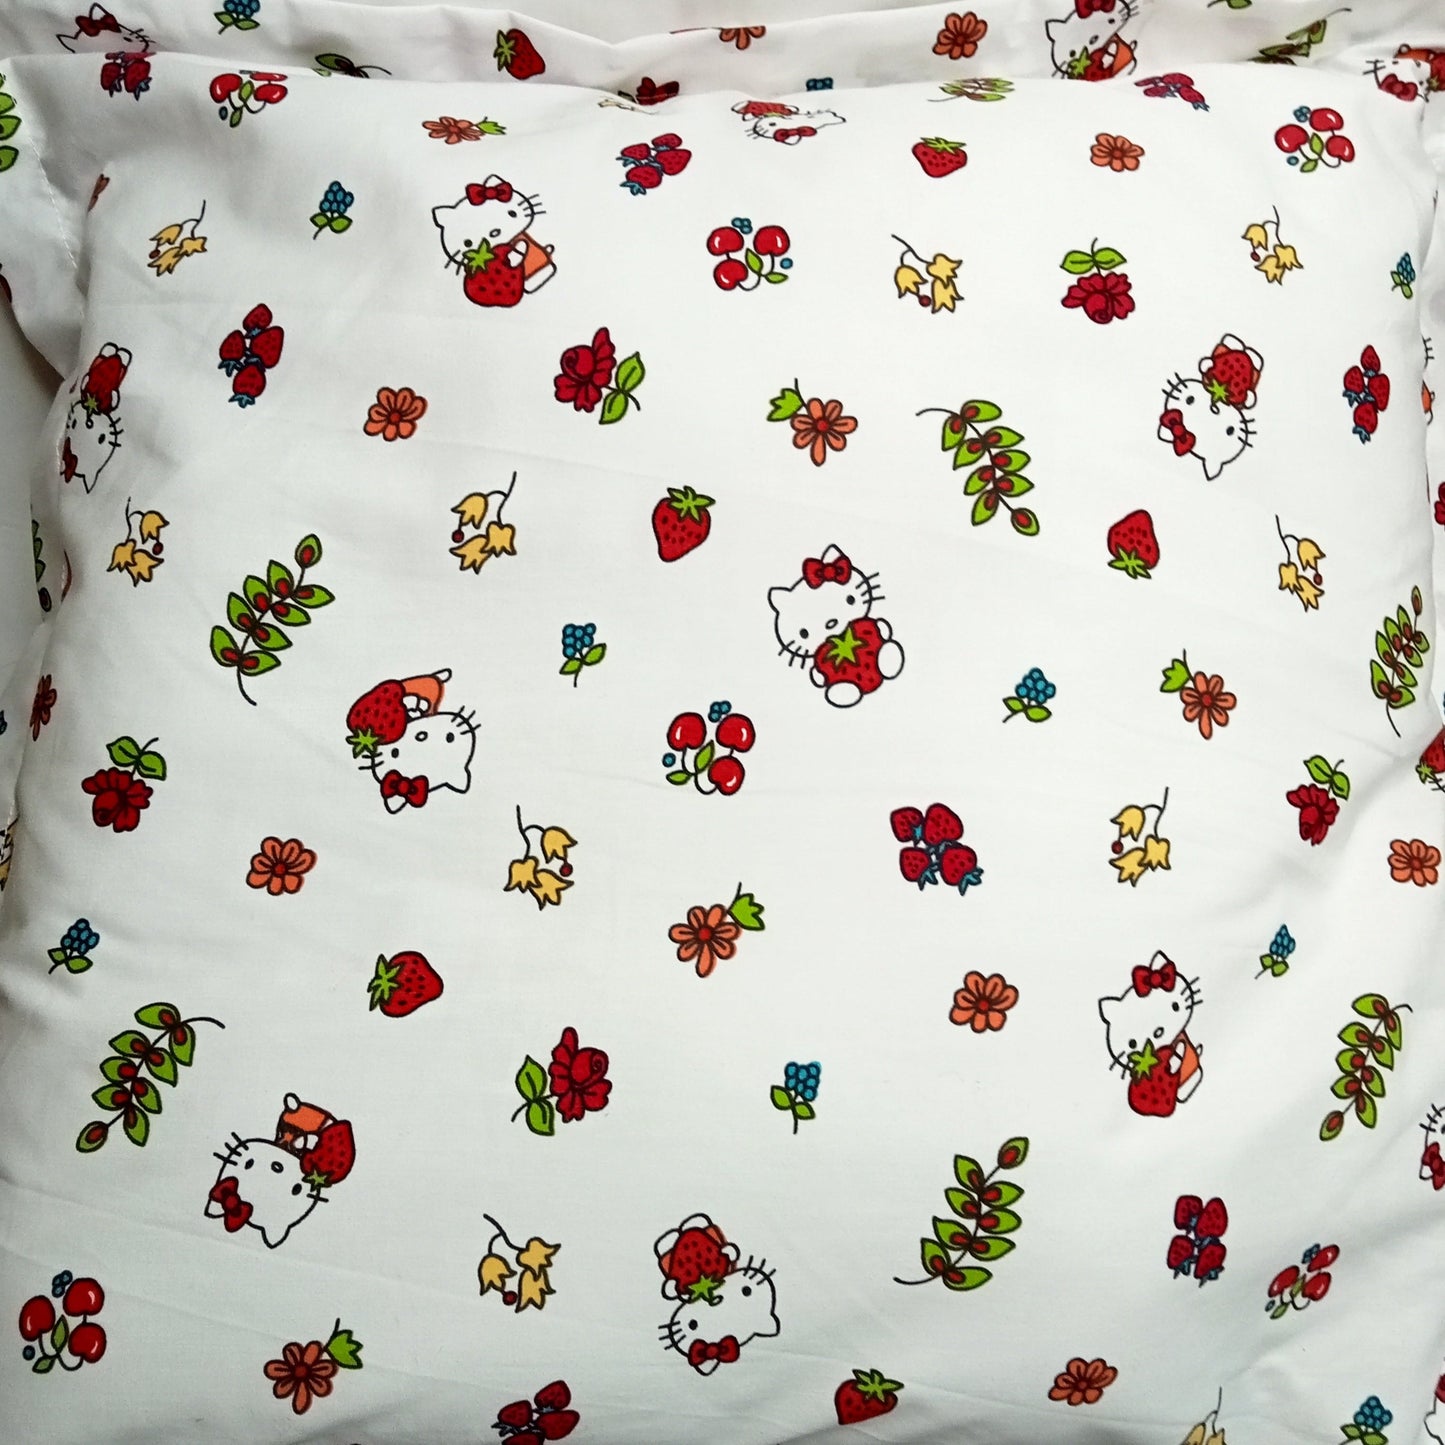 Strawberry Fields Filled Cushion by Hello Kitty at Liberty